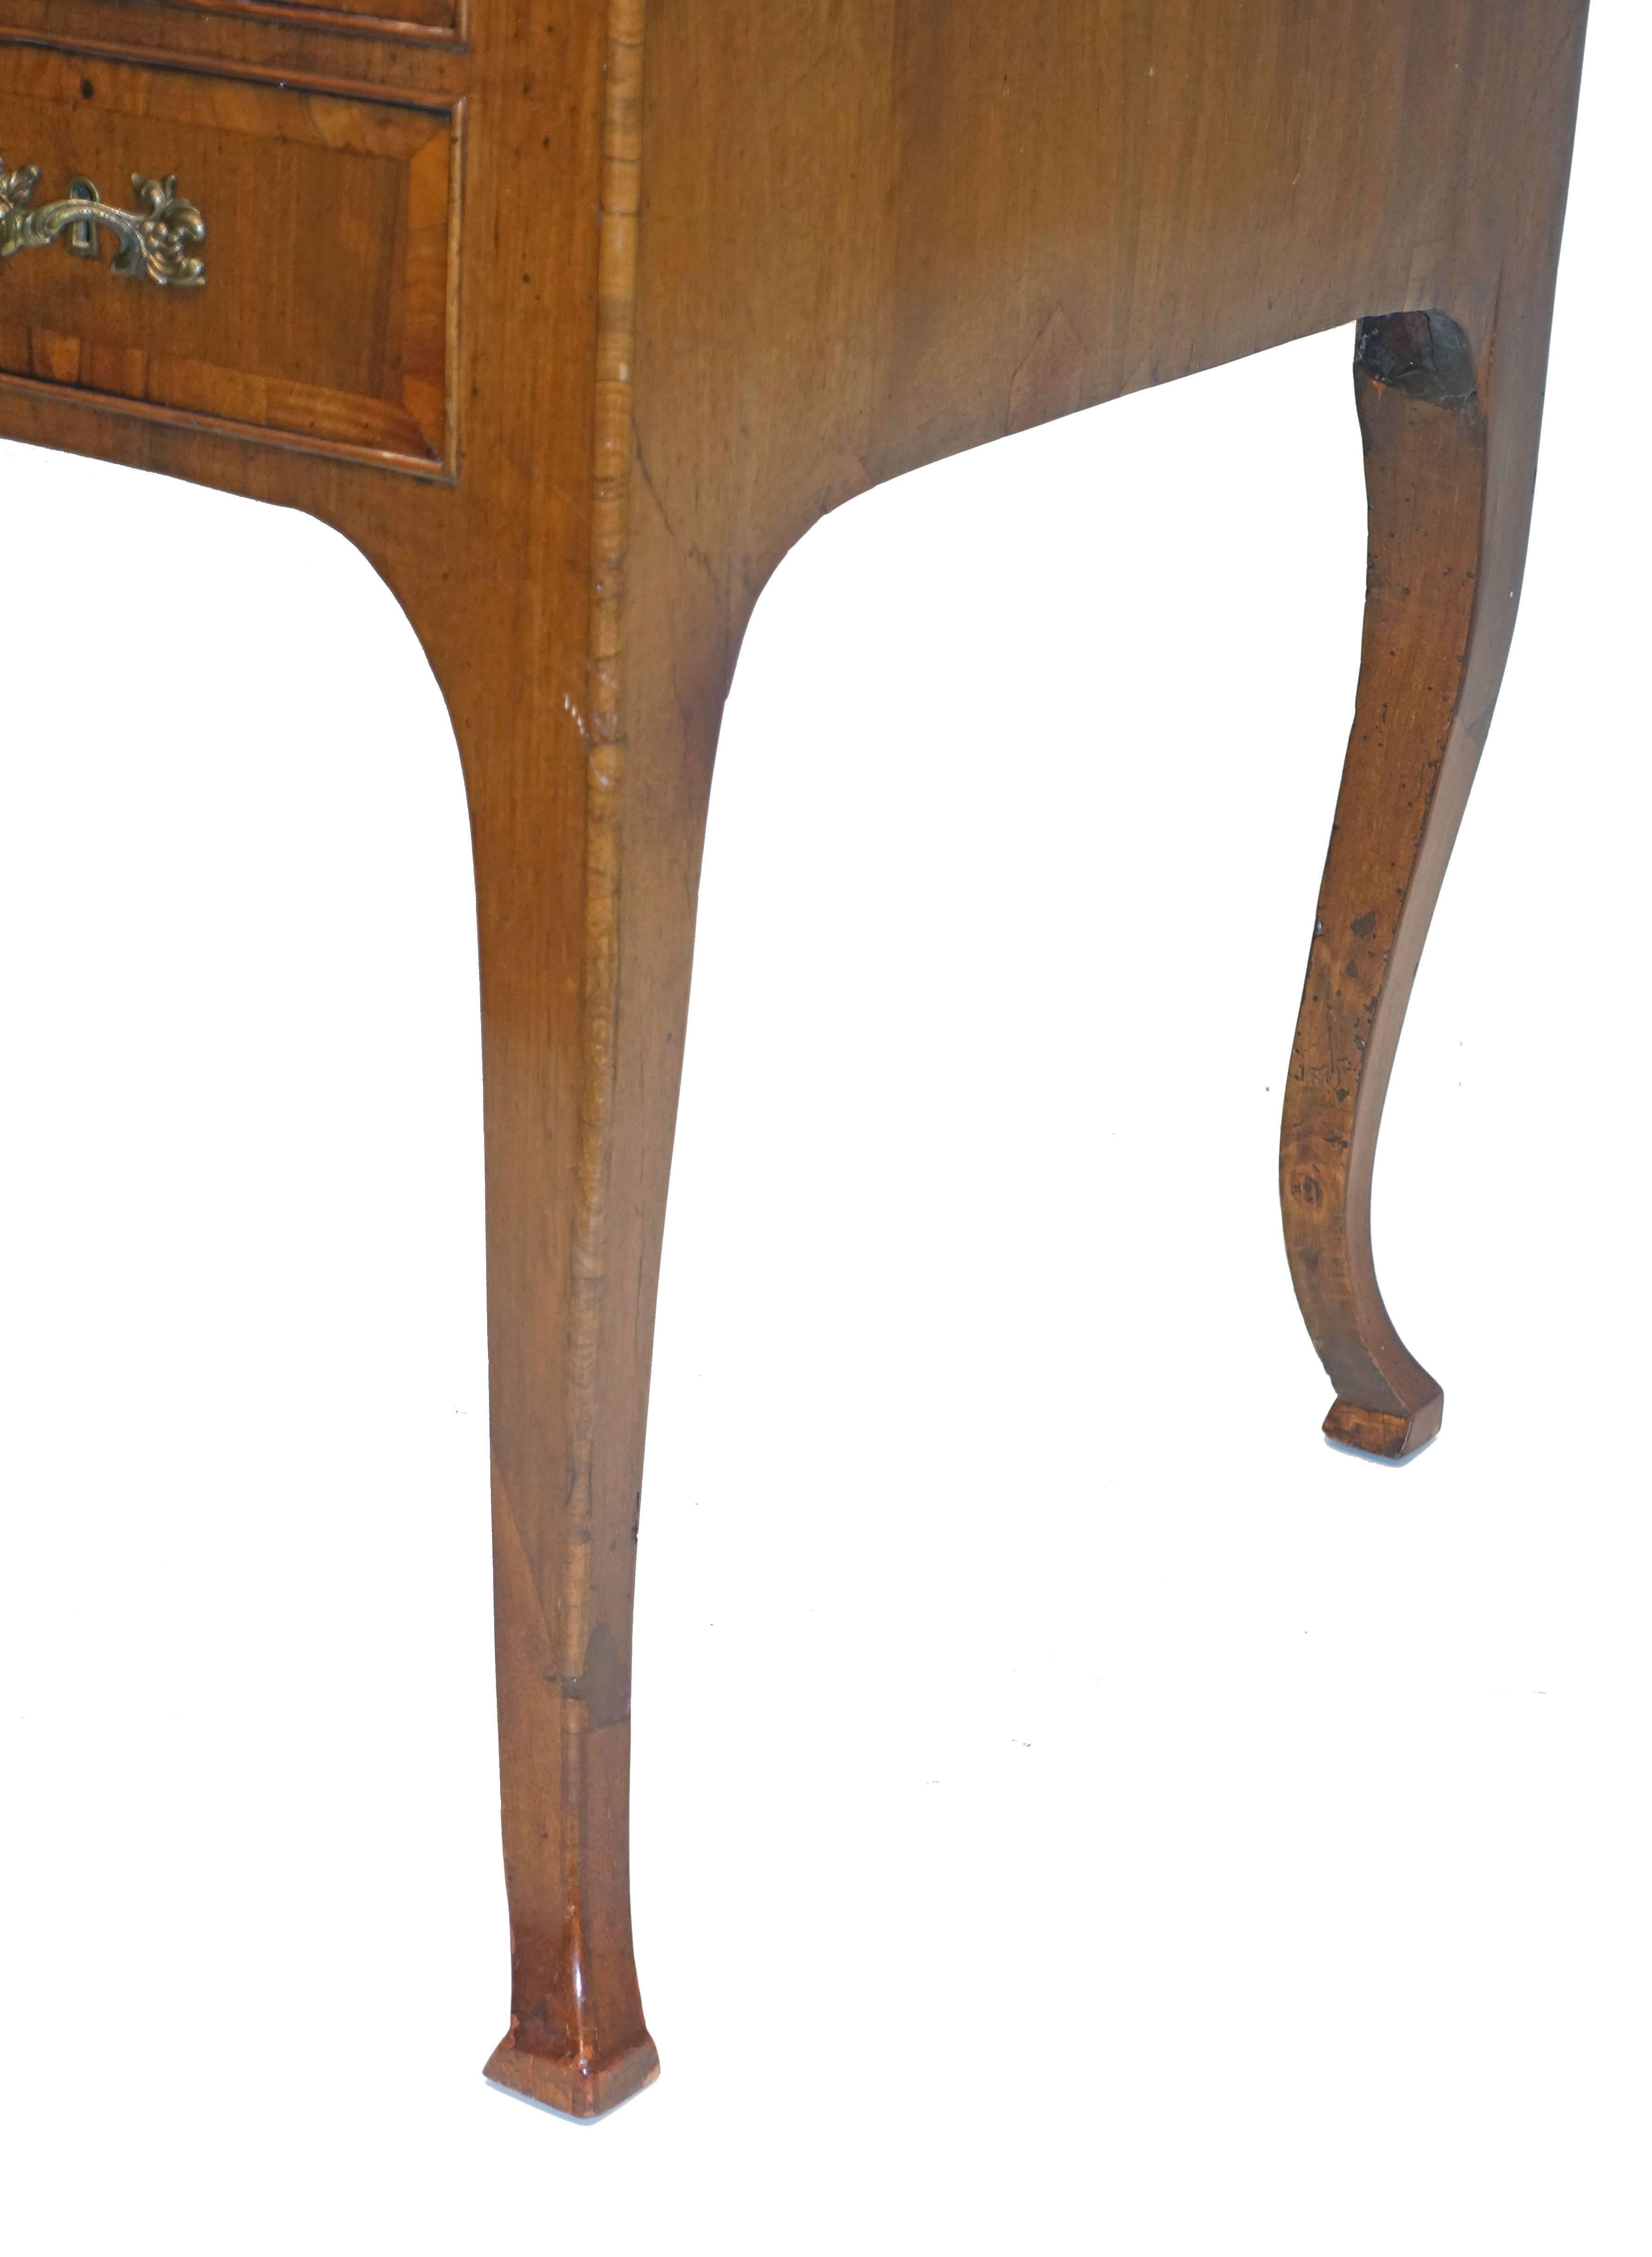 Leather Italian Neoclassical Walnut Desk with Satinwood, Inlay